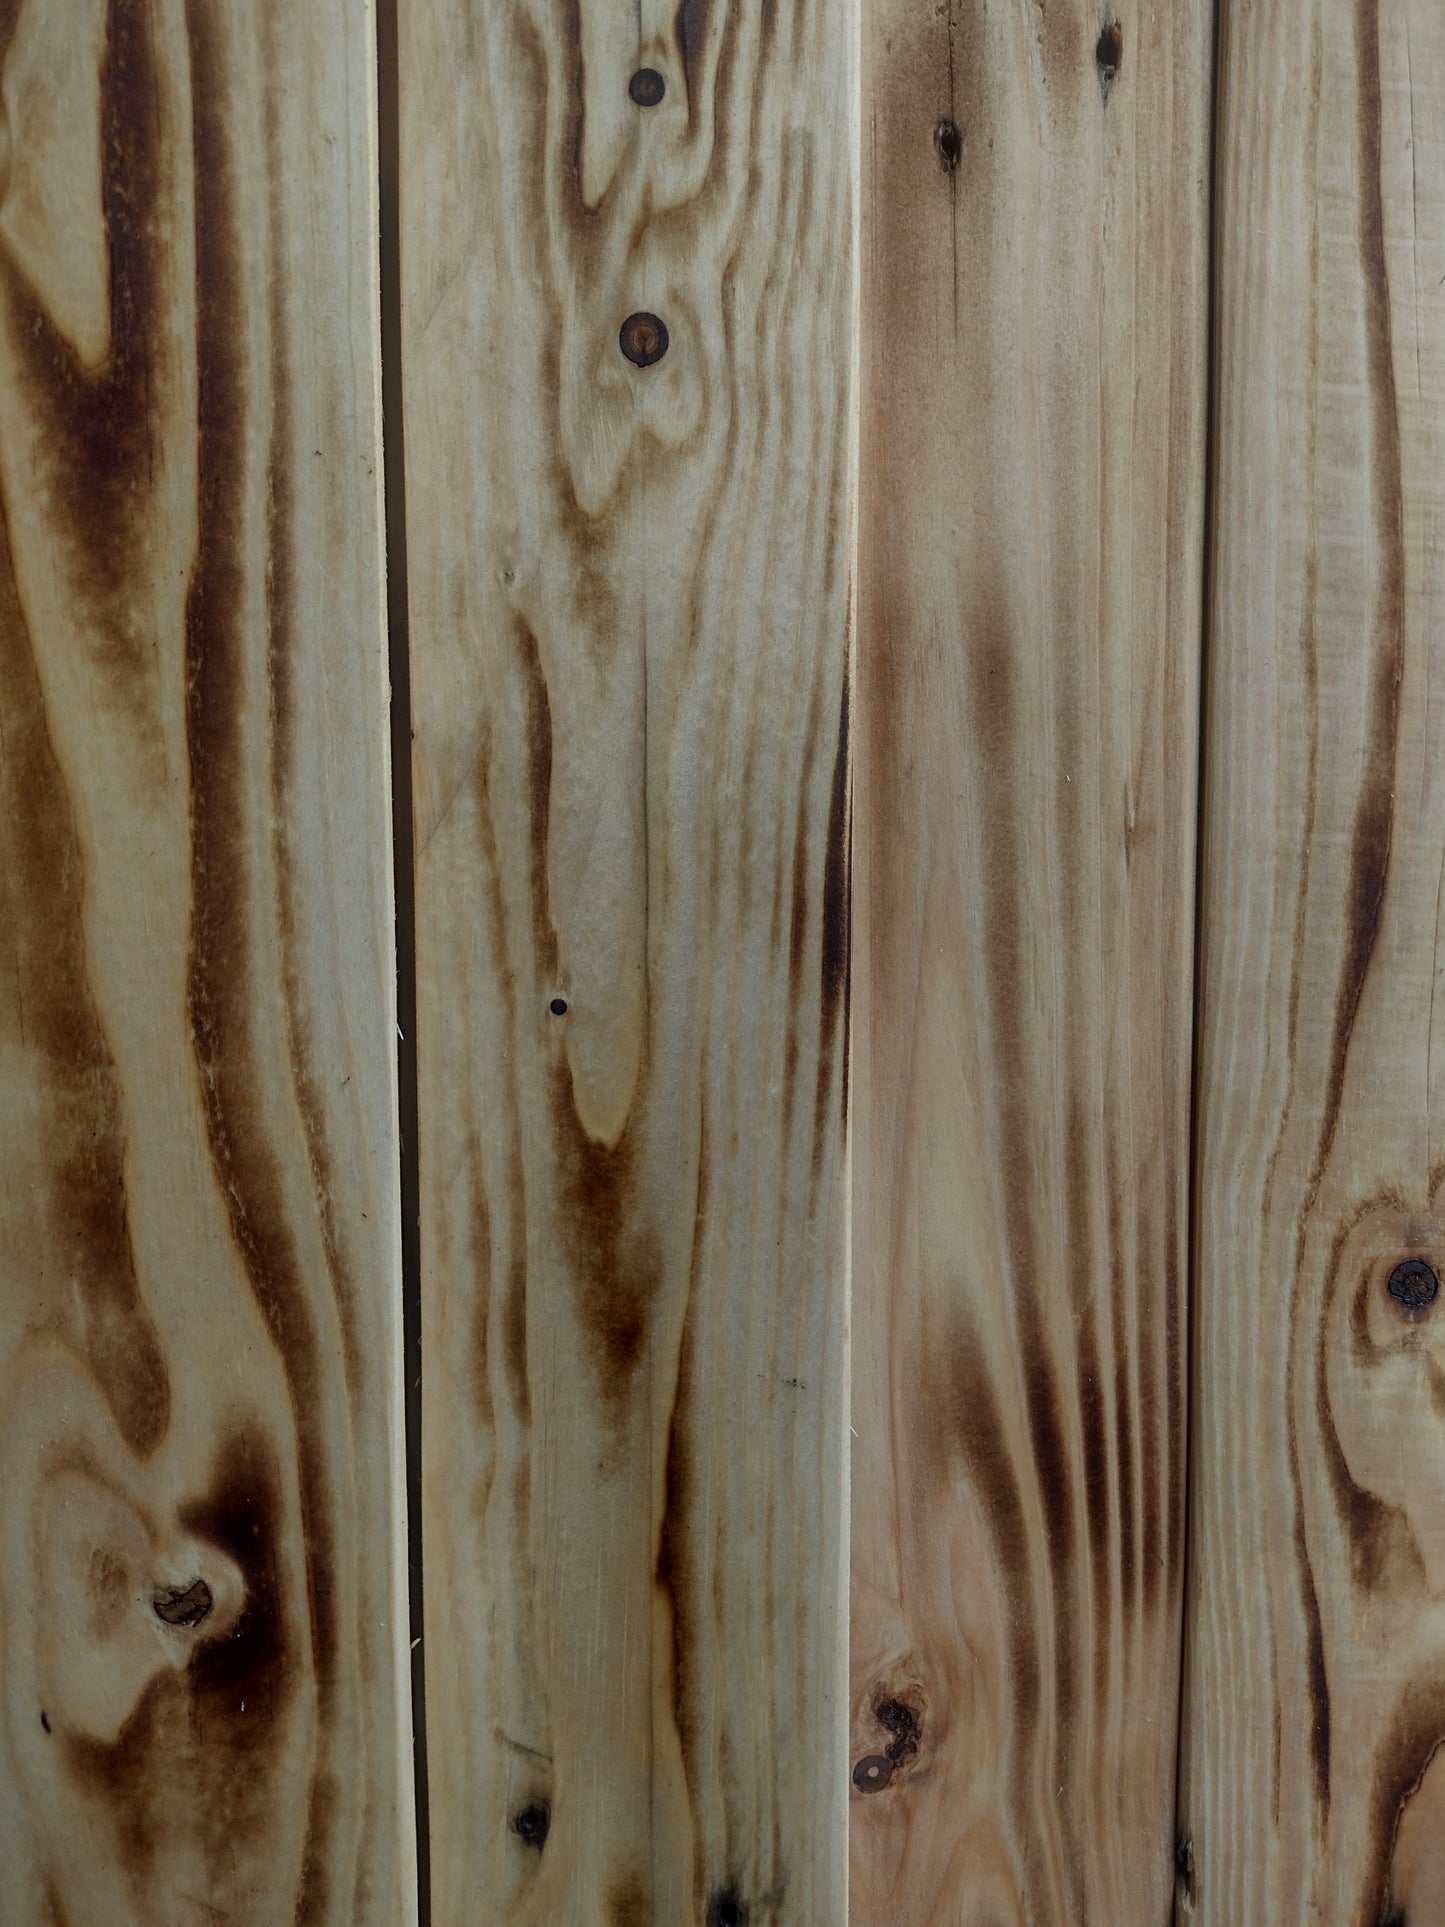 Charred Wooden Planks 1sqm  - Sanded and De-nailed - Lightweight Planks